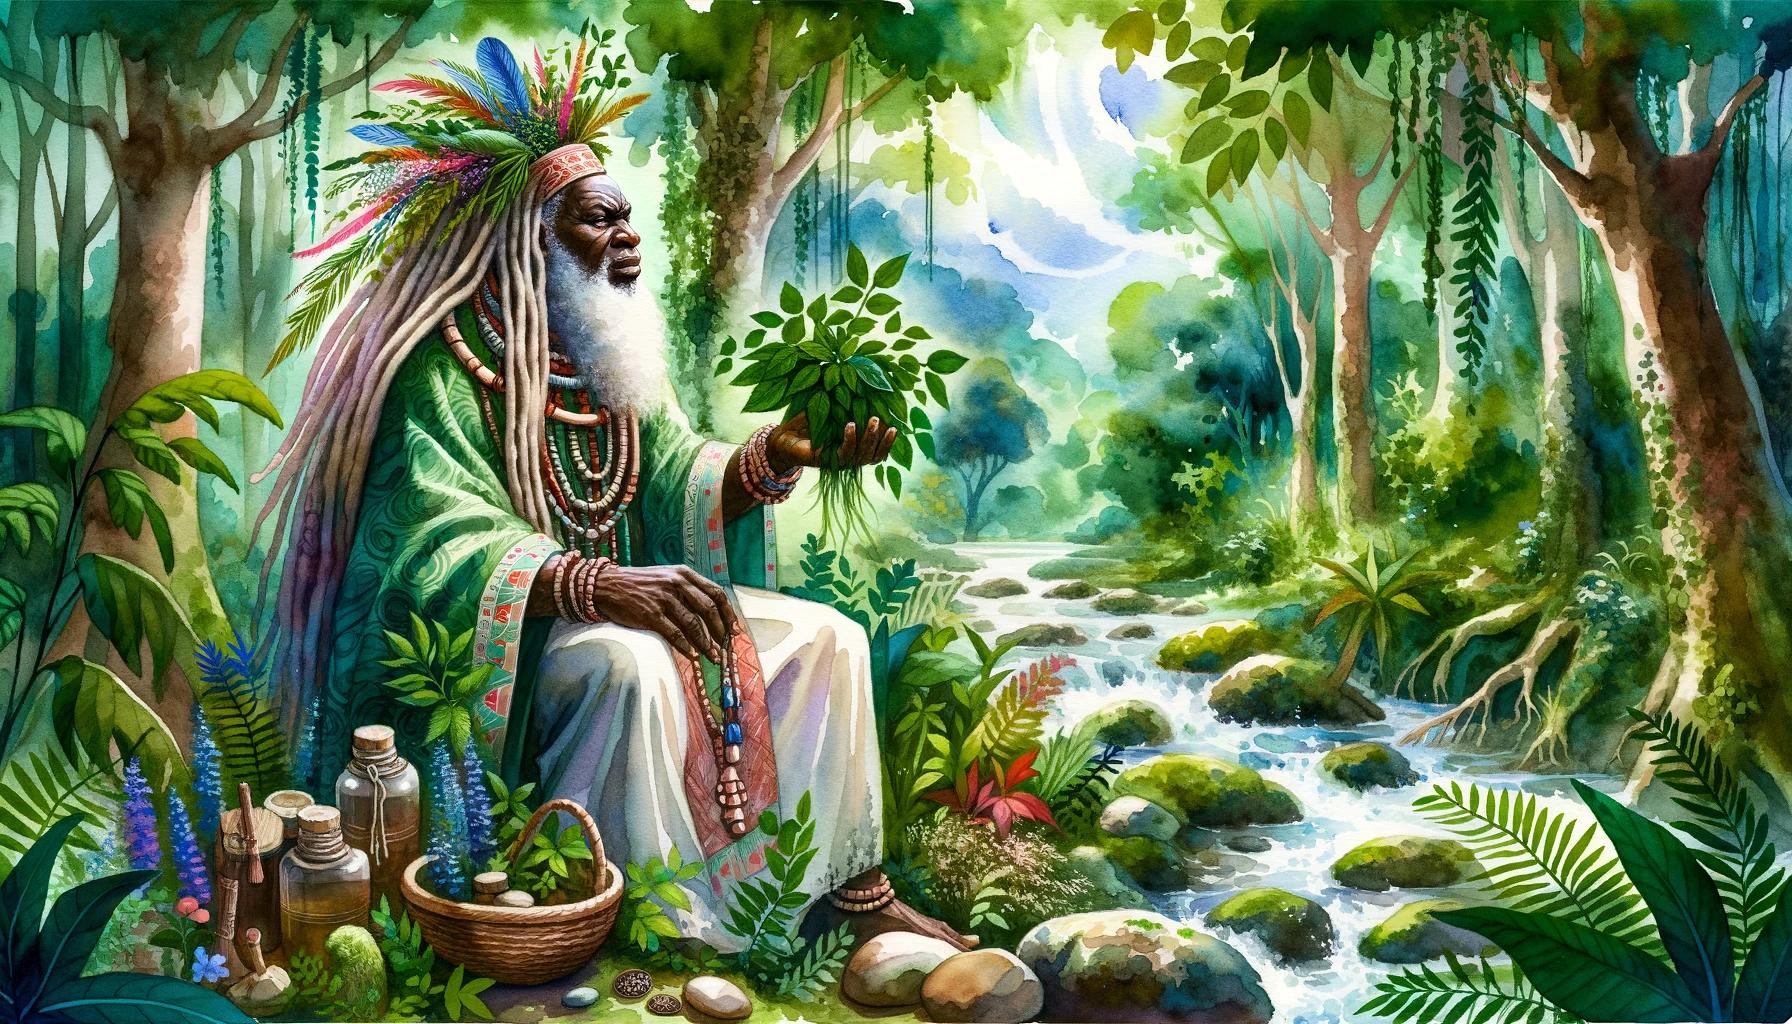 Who is Erinle, the African God: Exploring the Deity’s Significance in African American Spiritual Traditions